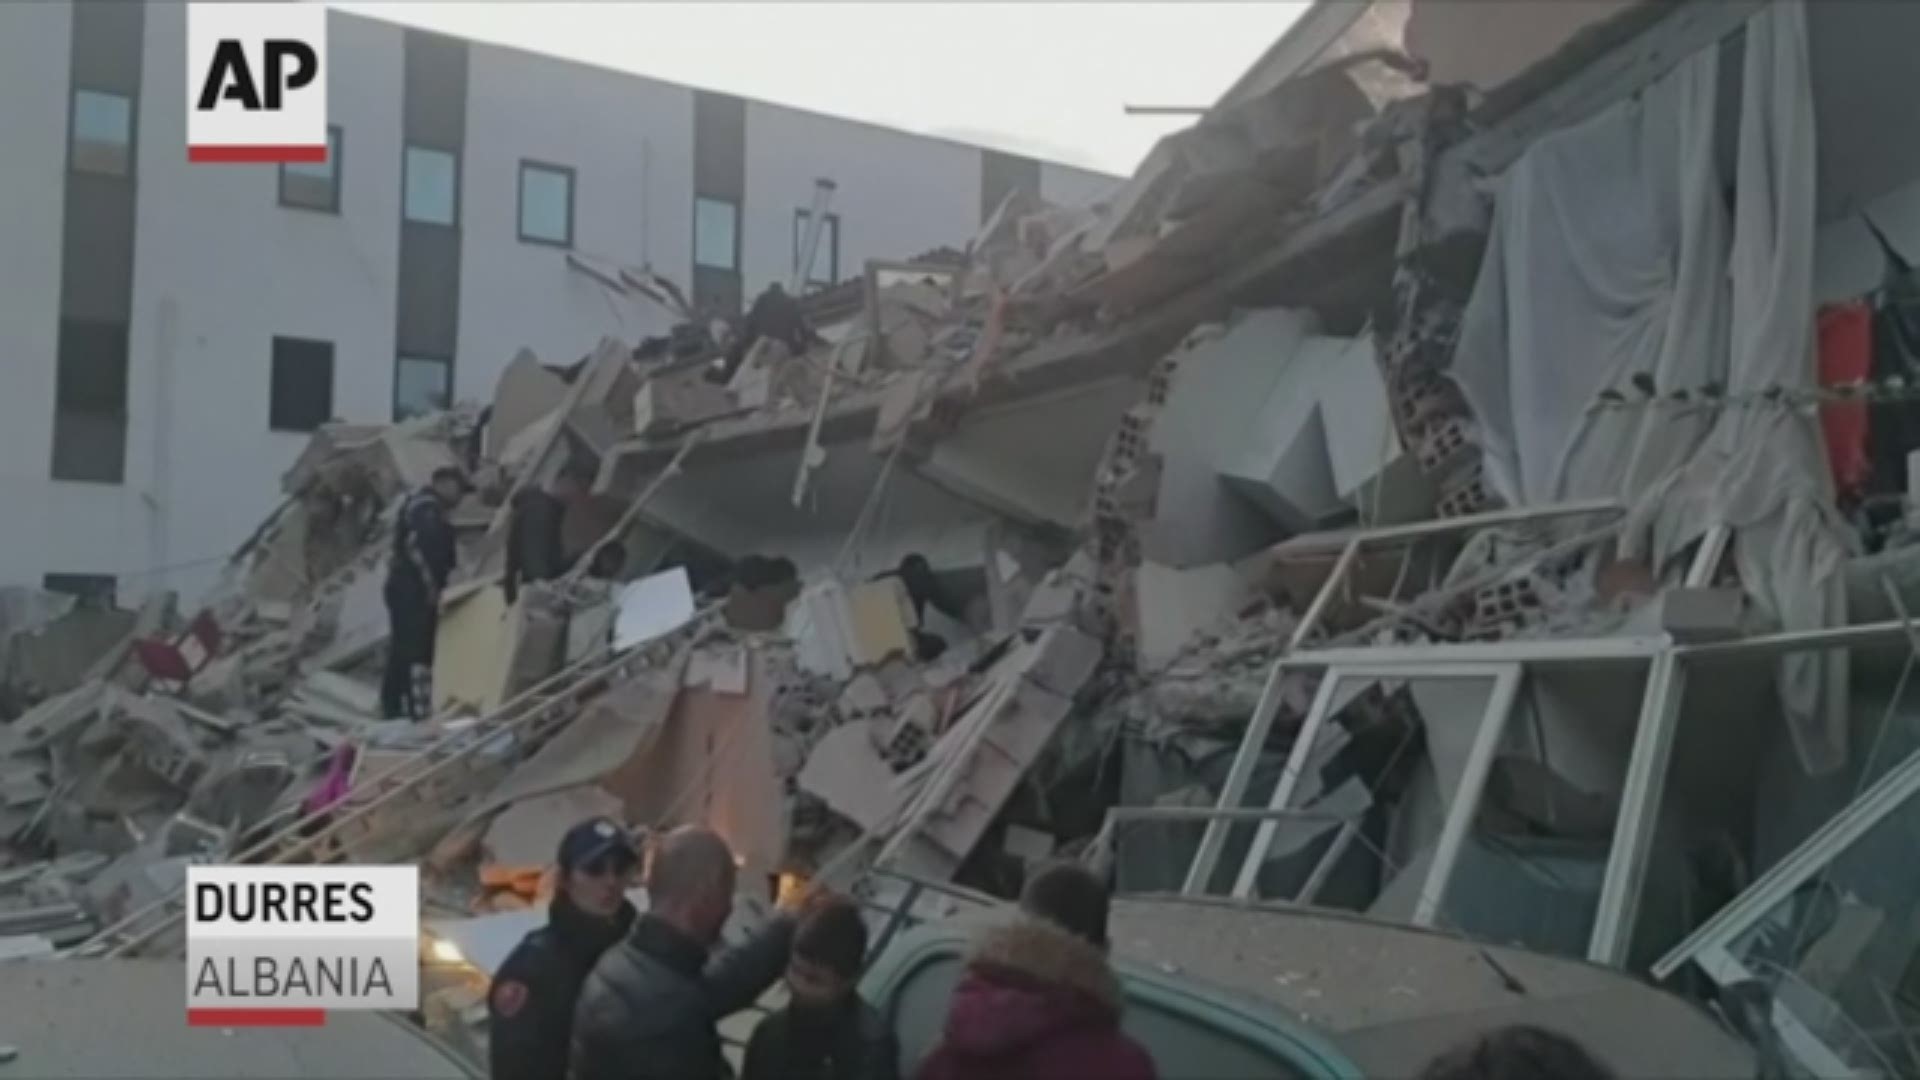 A strong earthquake shook Albania early Tuesday, killing some people who were trapped in collapsed buildings and injuring hundreds.